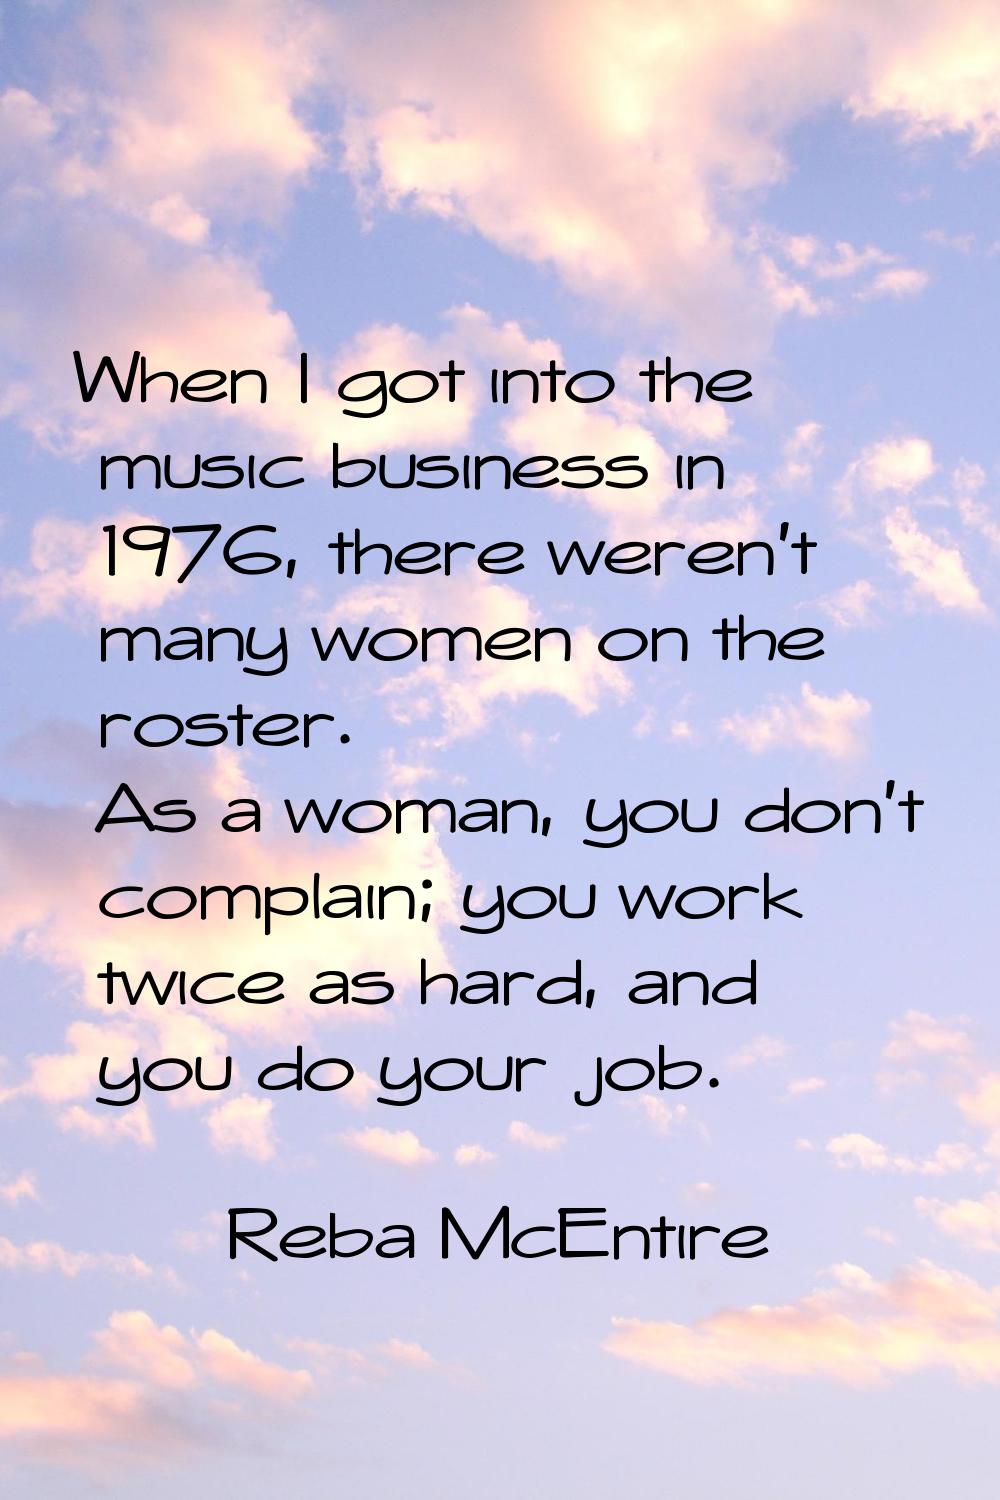 When I got into the music business in 1976, there weren't many women on the roster. As a woman, you